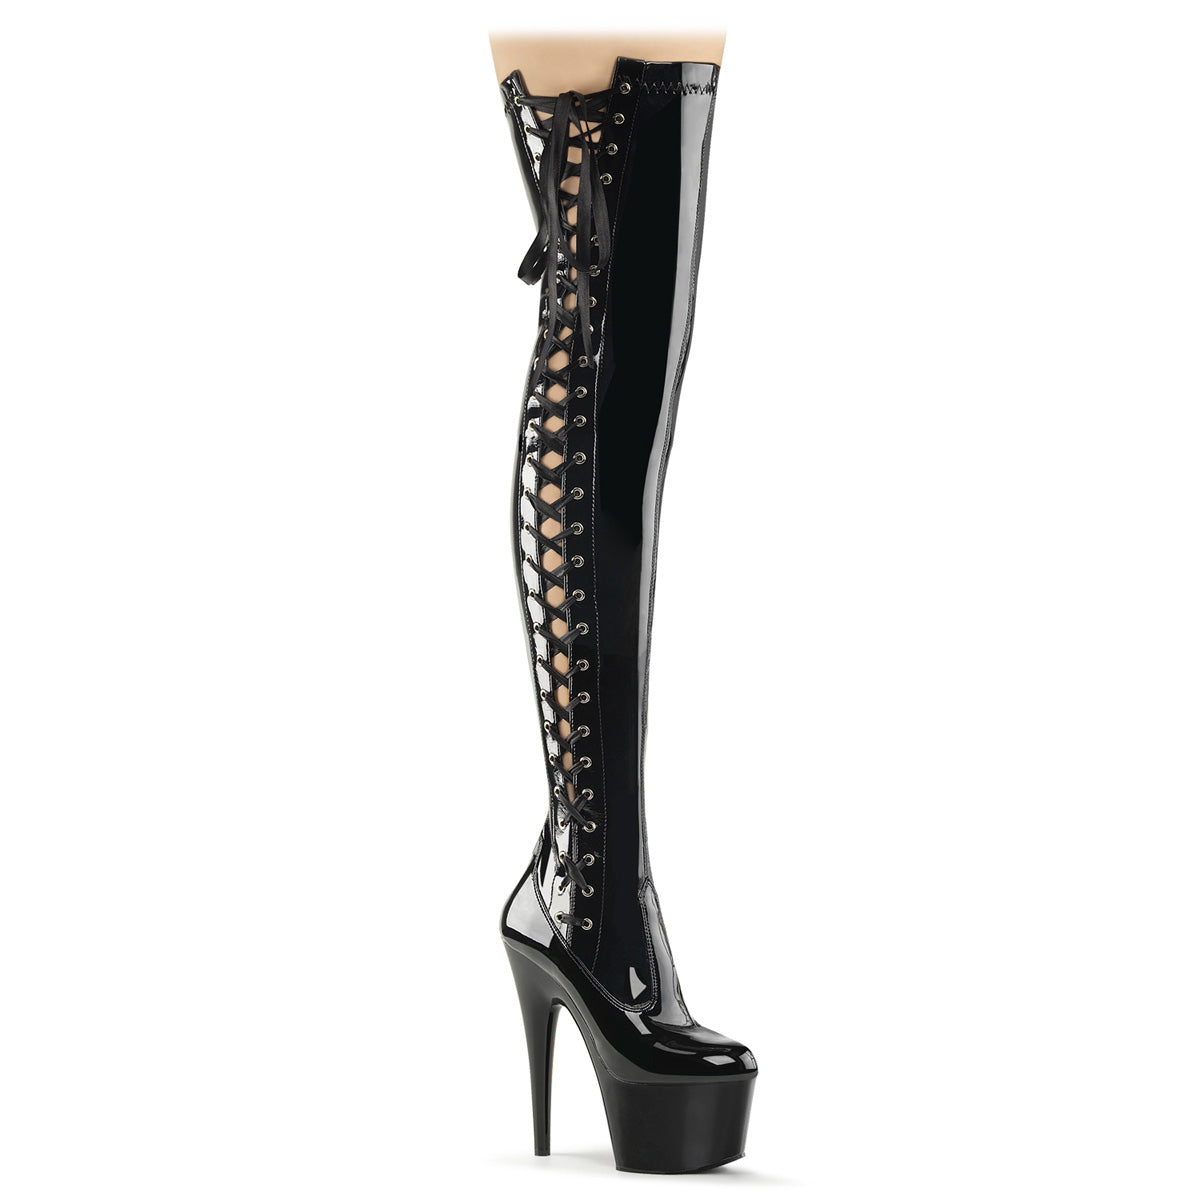 ADORE-3050 7" Black Stretch Patent Pole Dancer Kinky Boots-Pleaser- Sexy Shoes